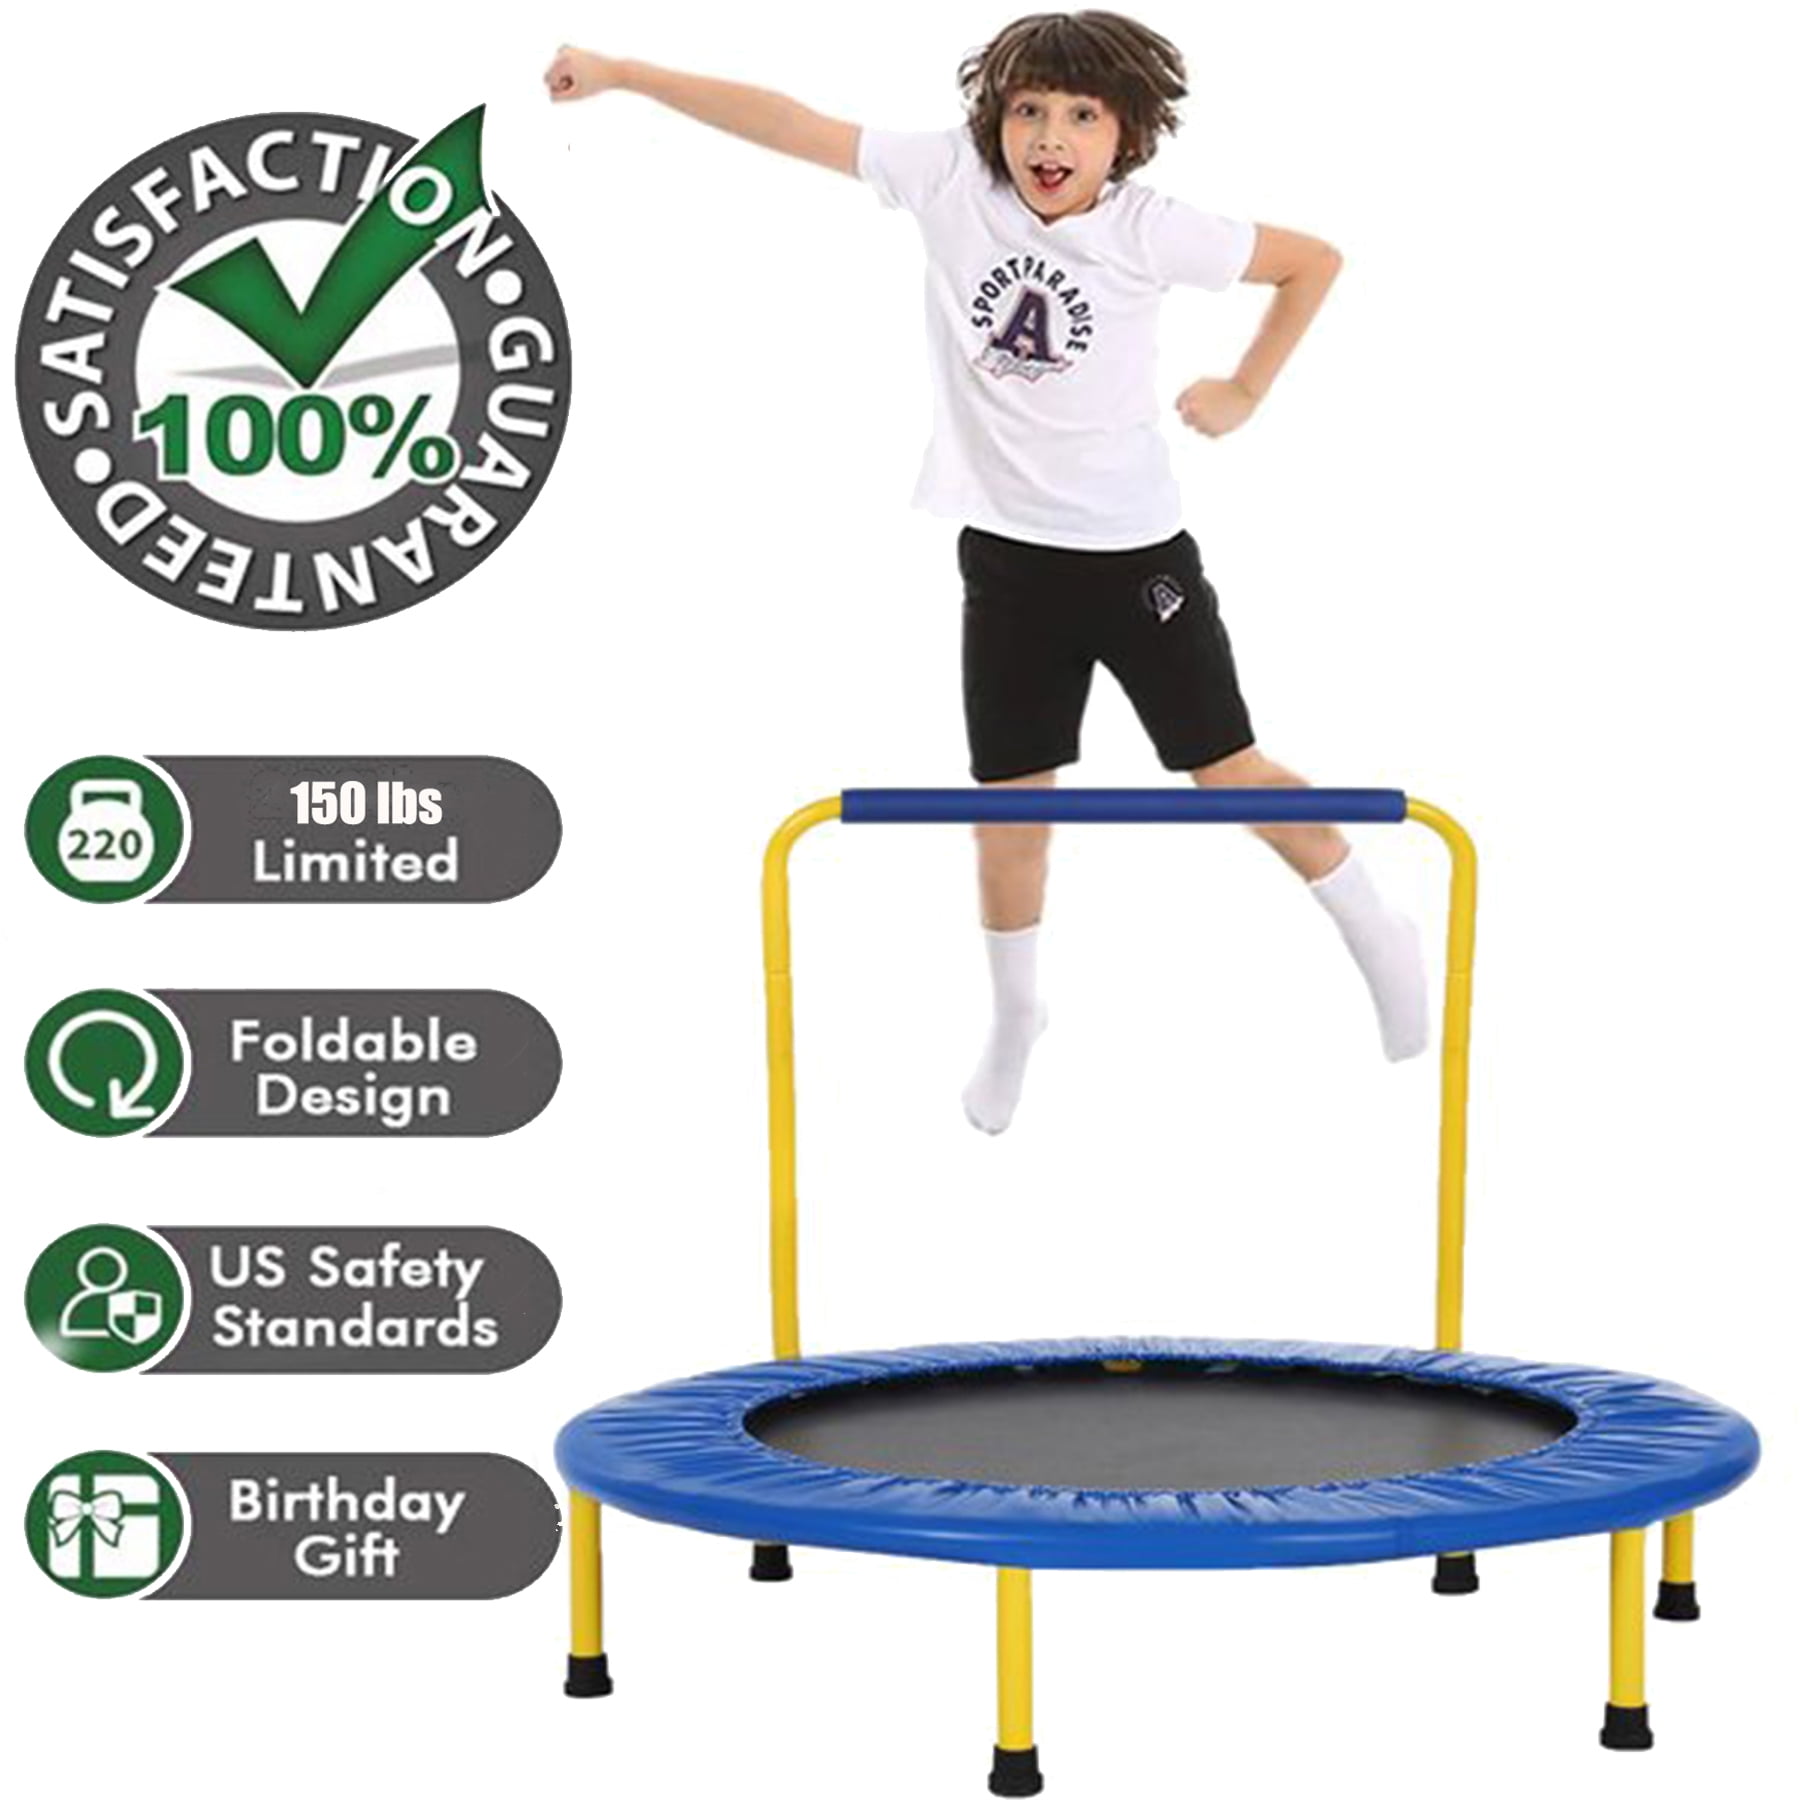 Details about   Foldable Mini Trampoline for Two Kids_Fitness Rebounder+Safety Pad_Entertainment 